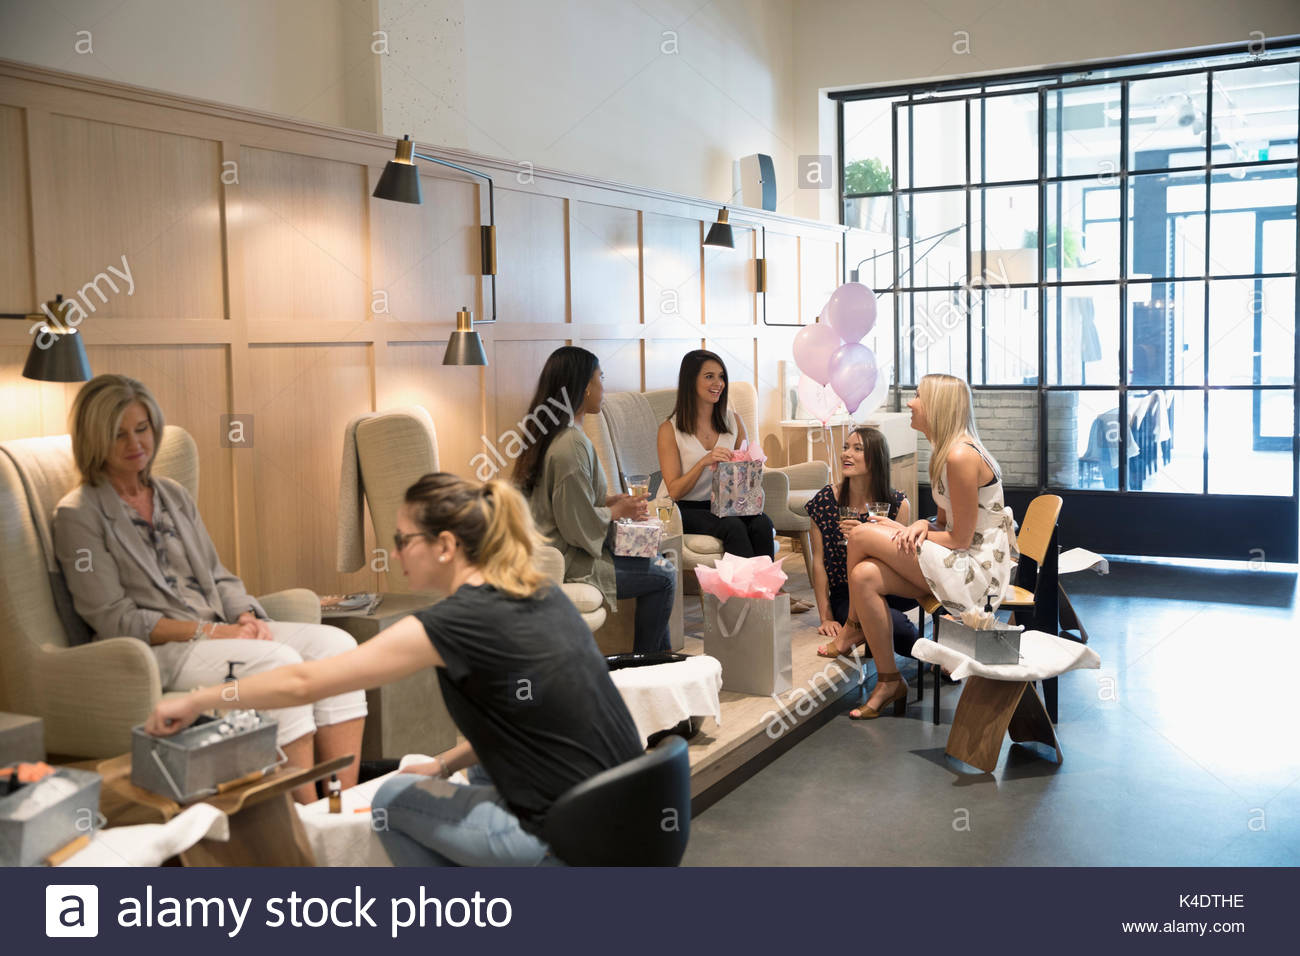 Bride-to-be and bridesmaid friends celebrating bridal shower in nail salon Stock Photo